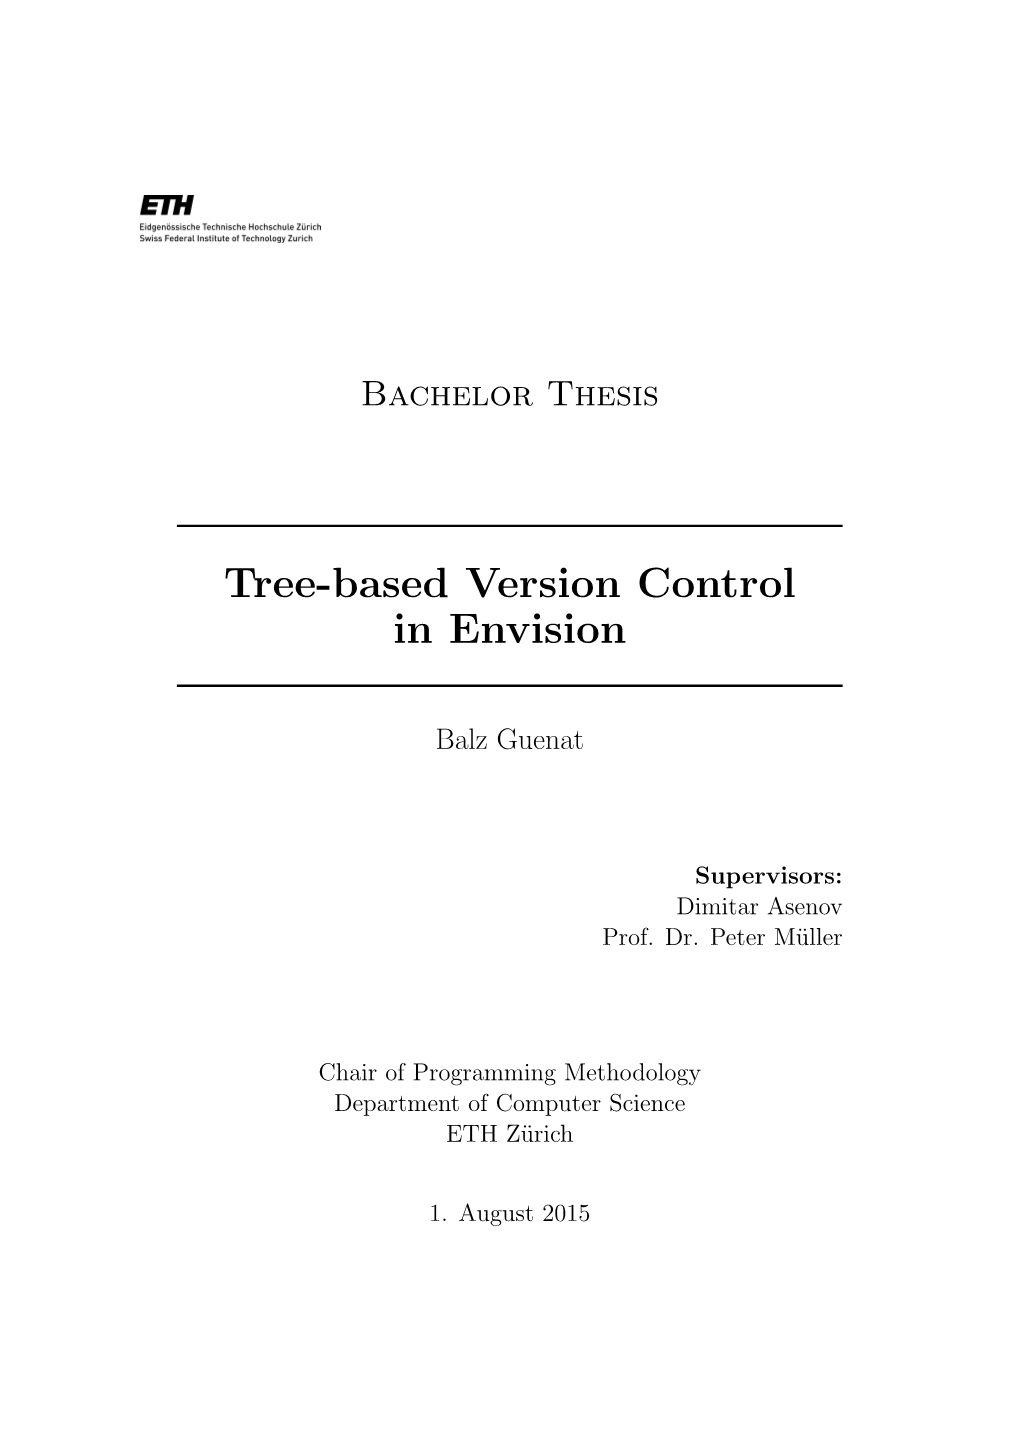 Tree-Based Version Control in Envision